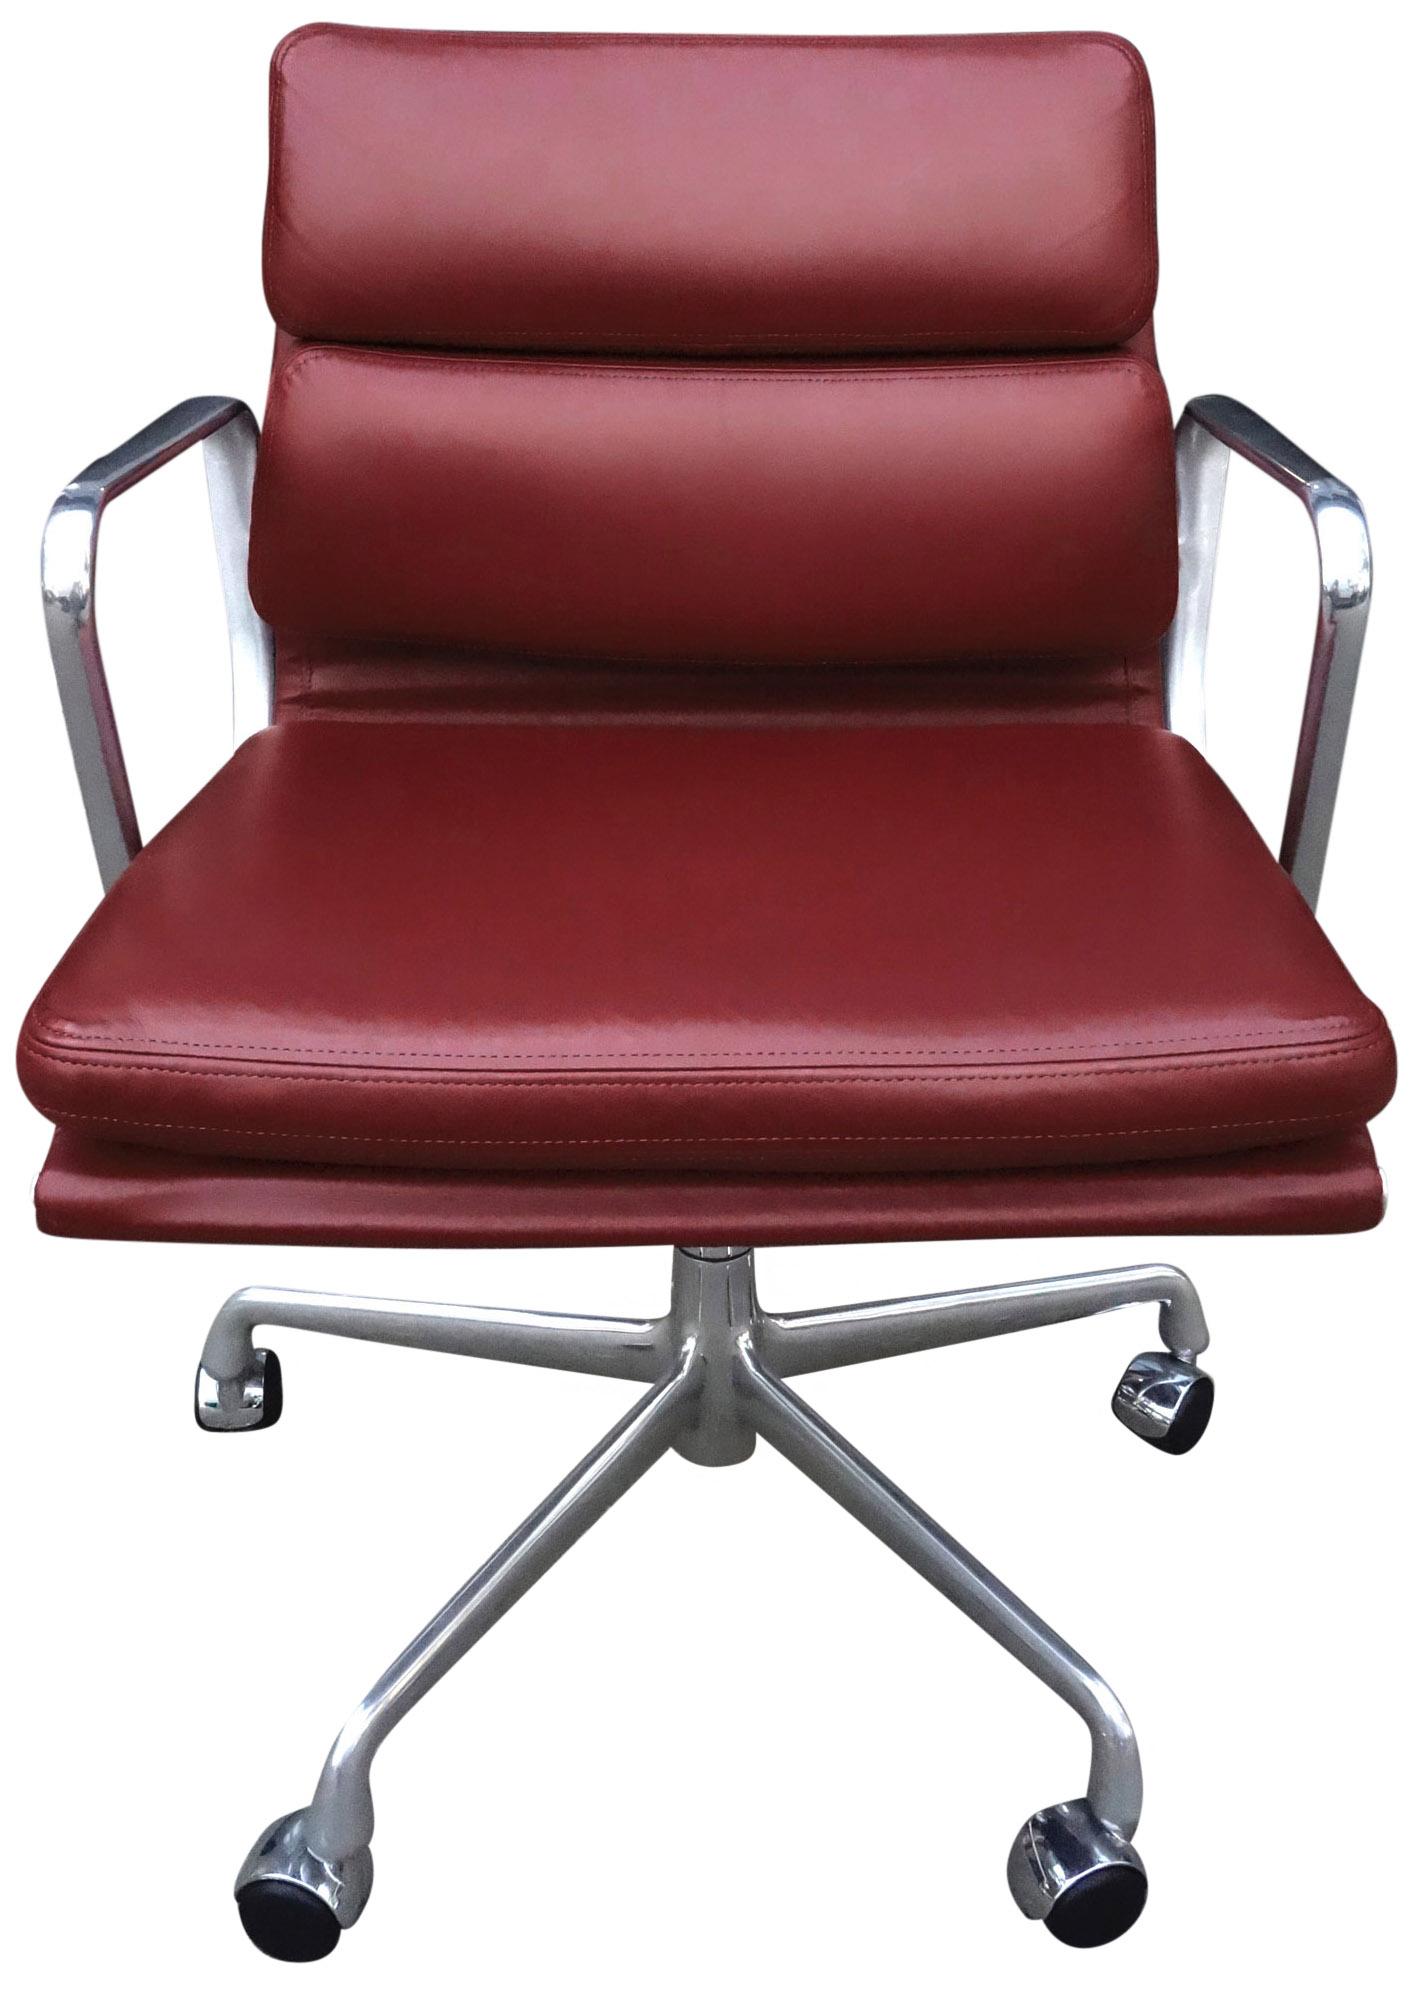 For your consideration is this authentic Eames for Herman Miller vintage soft pad chairs in Burgundy leather. Adjustable tilt and height. 

These authentic vintage examples are icons of Mid-Century Modern design. The chairs part of the Eames